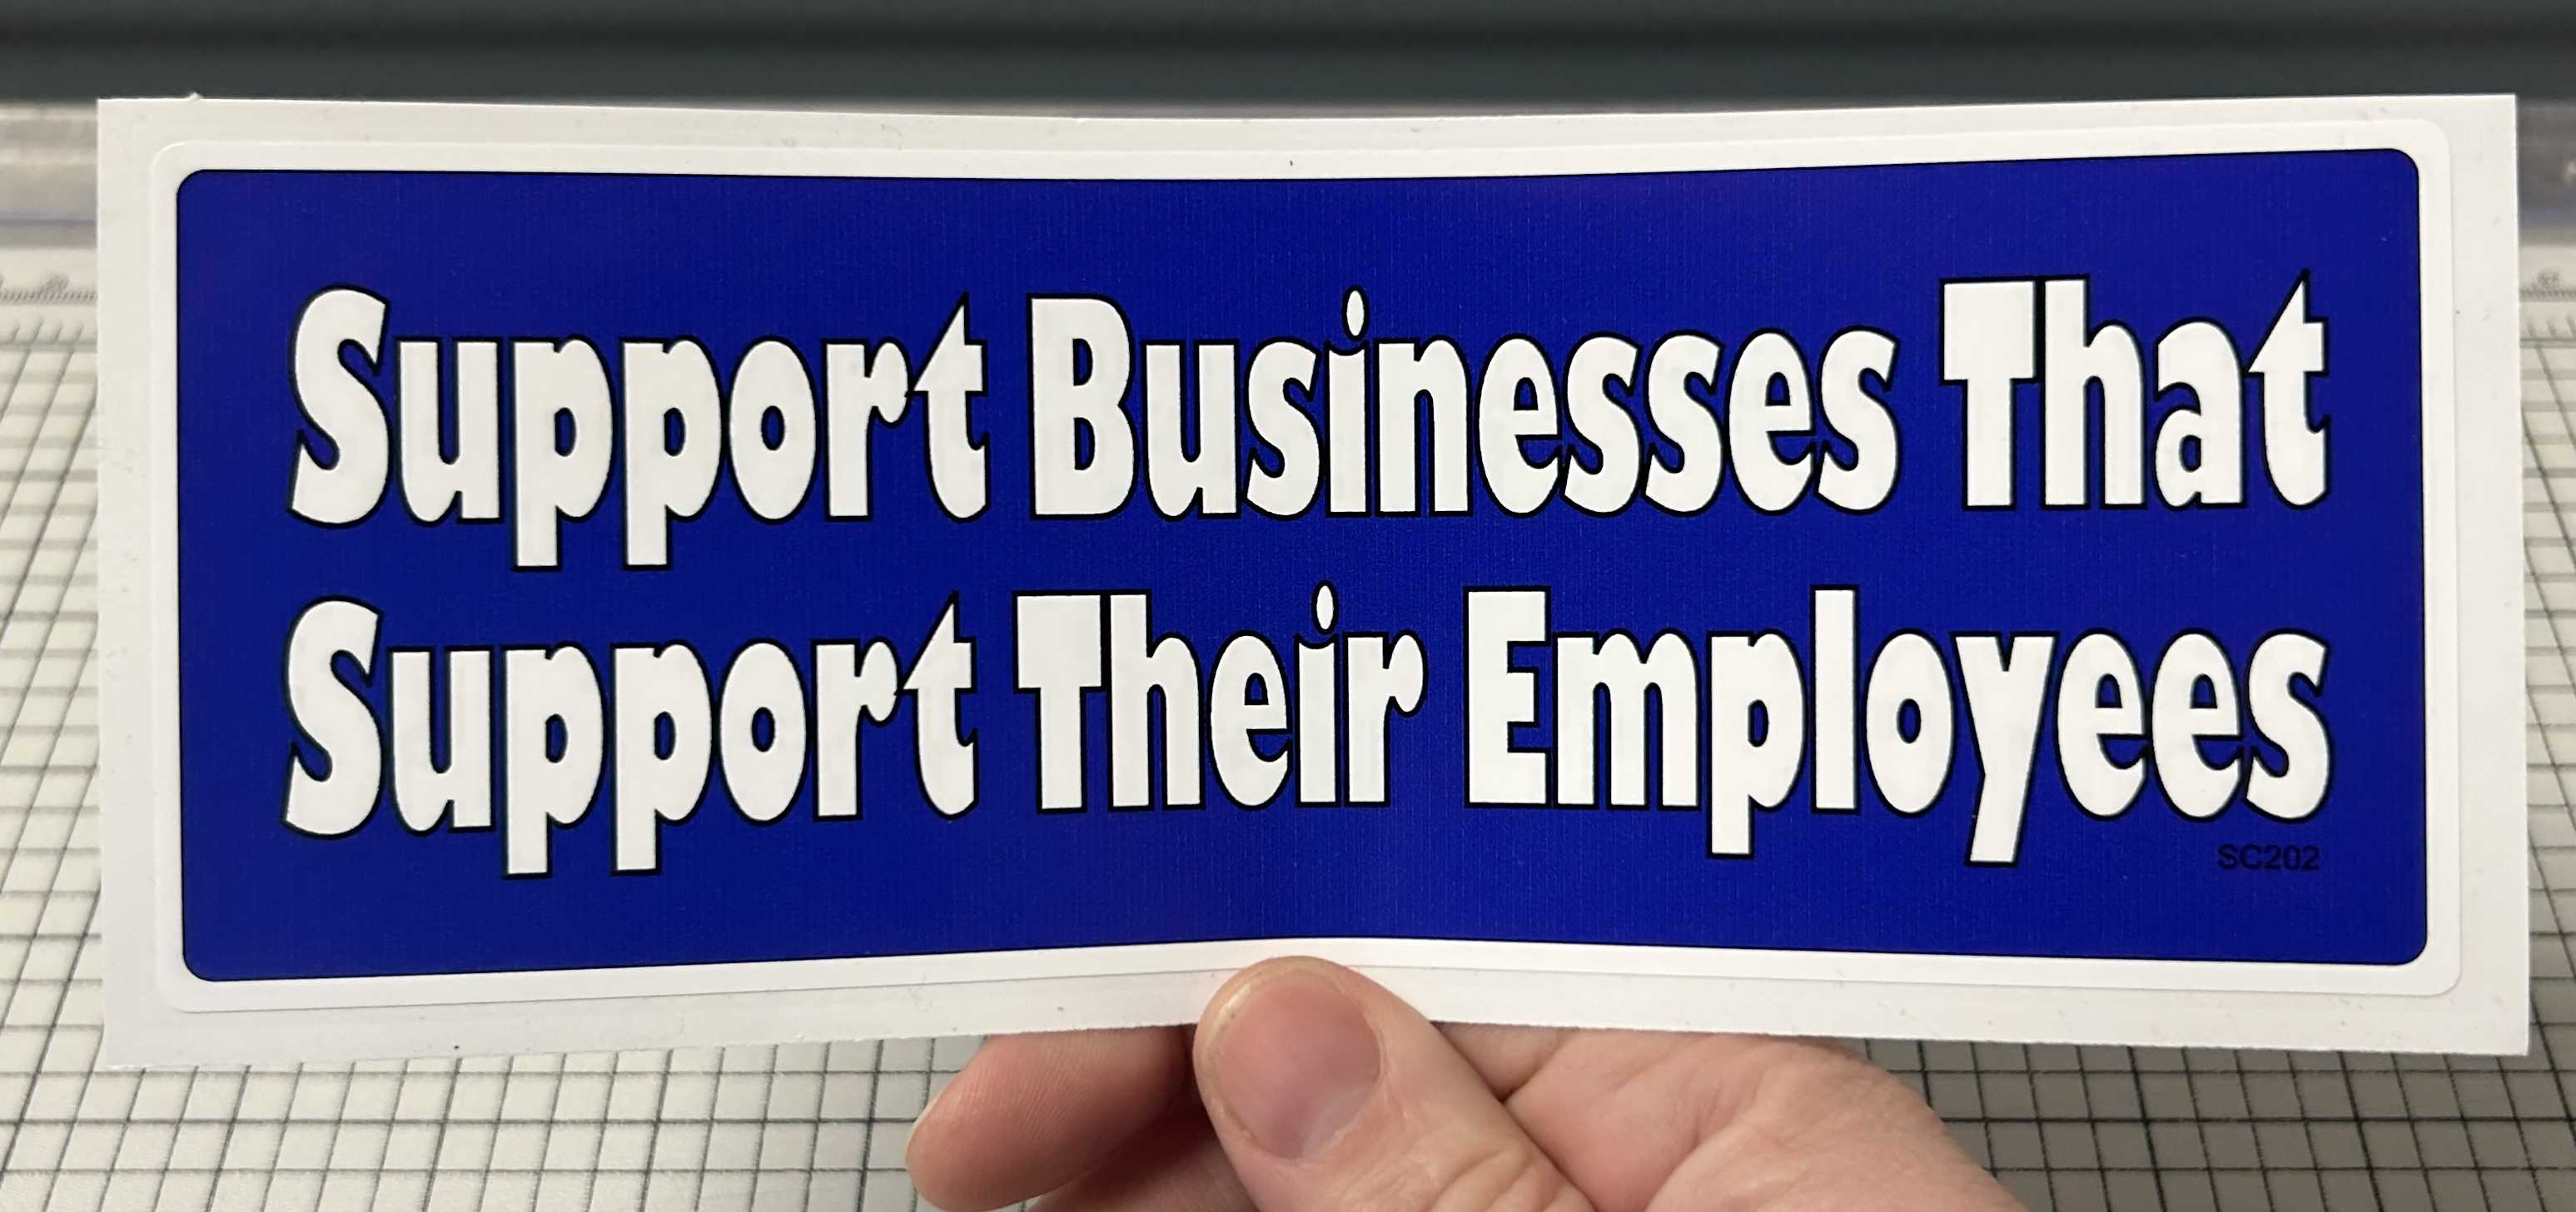 SUPPORT BUSINESSES THAT SUPPORT THEIR EMPLOYEES BUMPER STICKER IN HAND